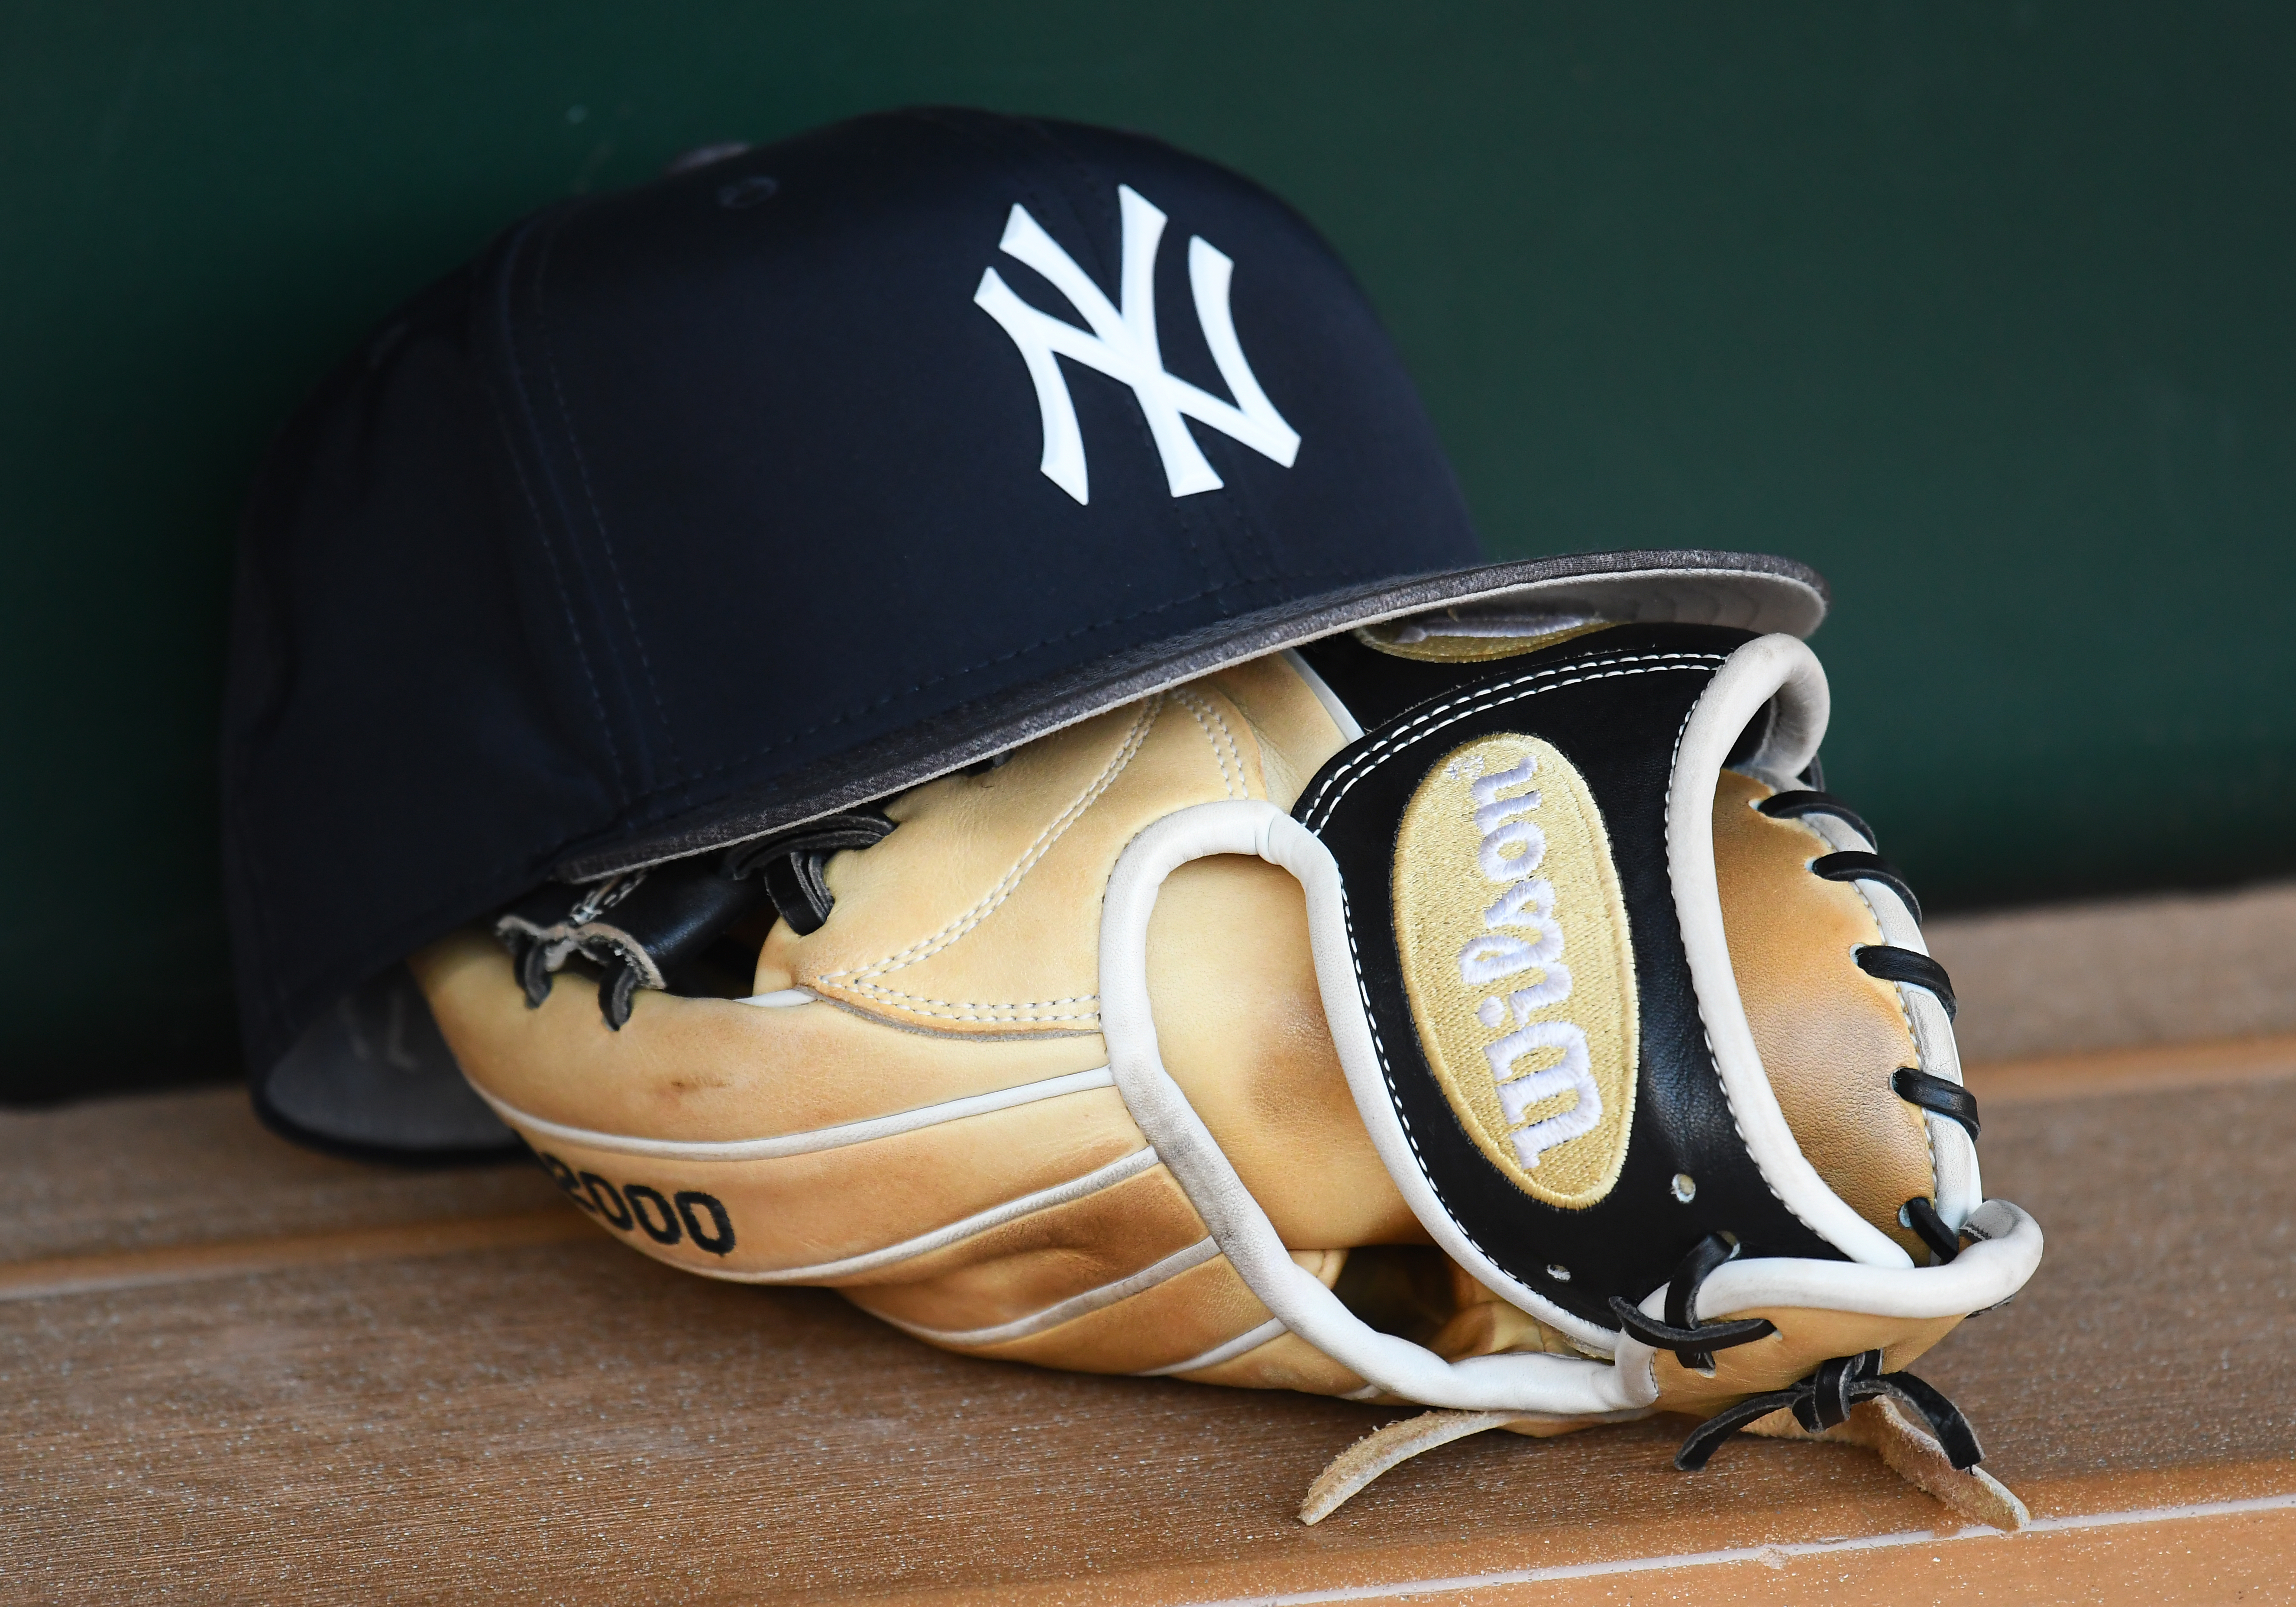 Yankees Trade Luke Voit to Padres for Pitching Prospect Justin Lange, News, Scores, Highlights, Stats, and Rumors